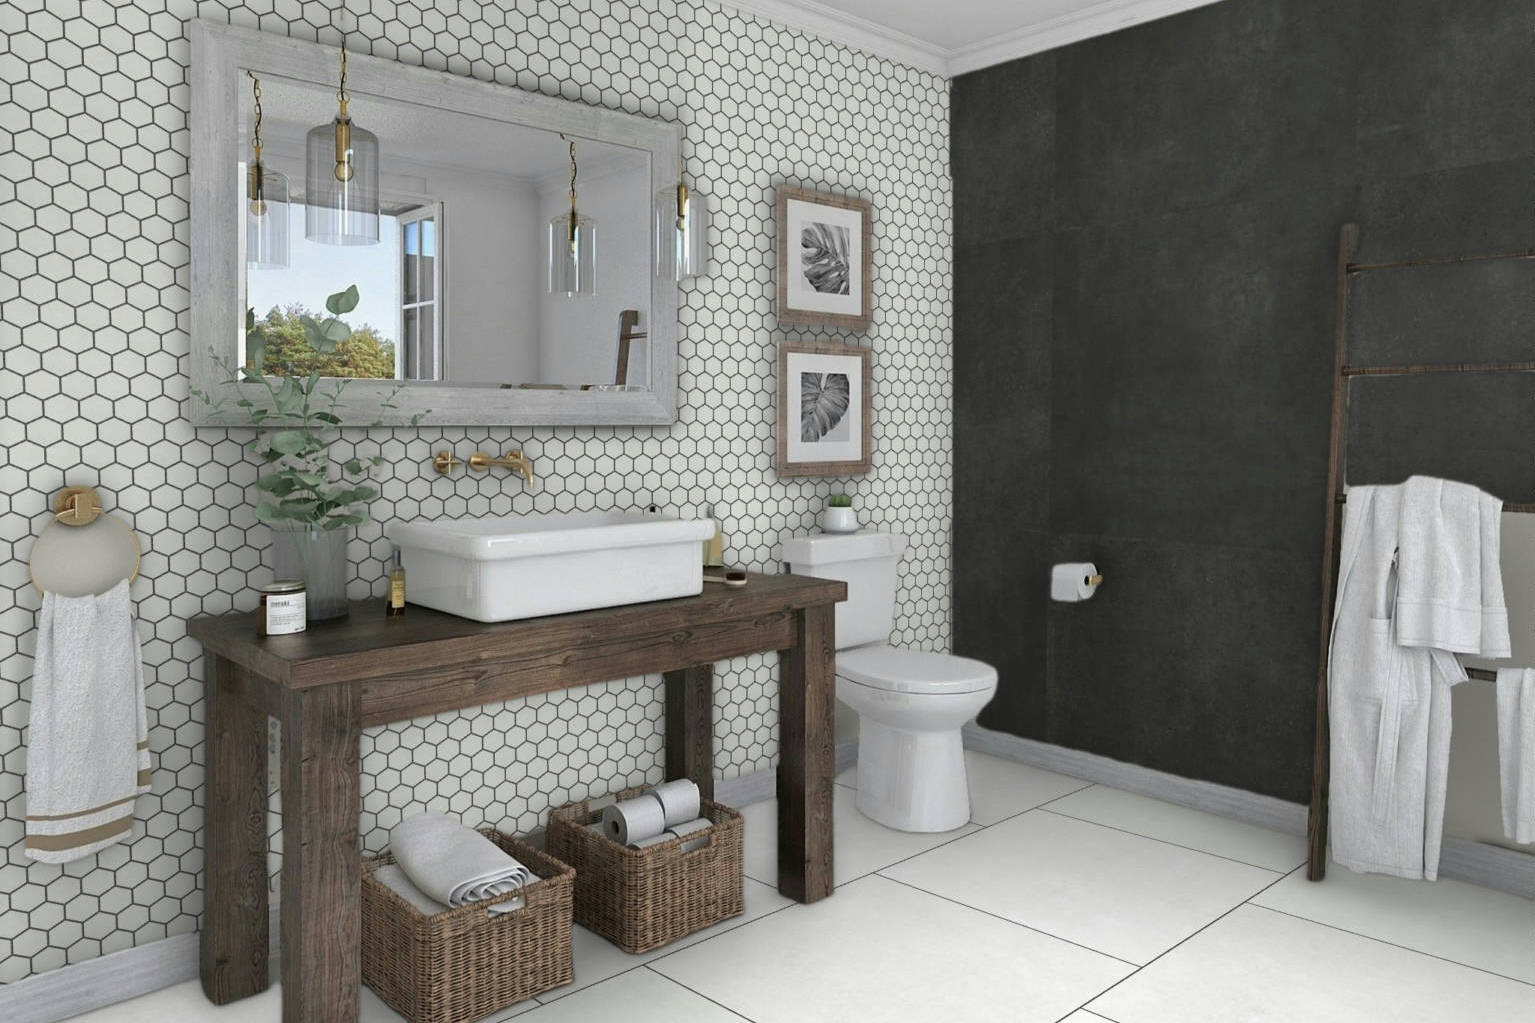 Ashland White 36x36, 3x3 Mosaic, and 48x48 Black | Qualis Ceramica | Luxury Tile and Vinyl at affordable prices